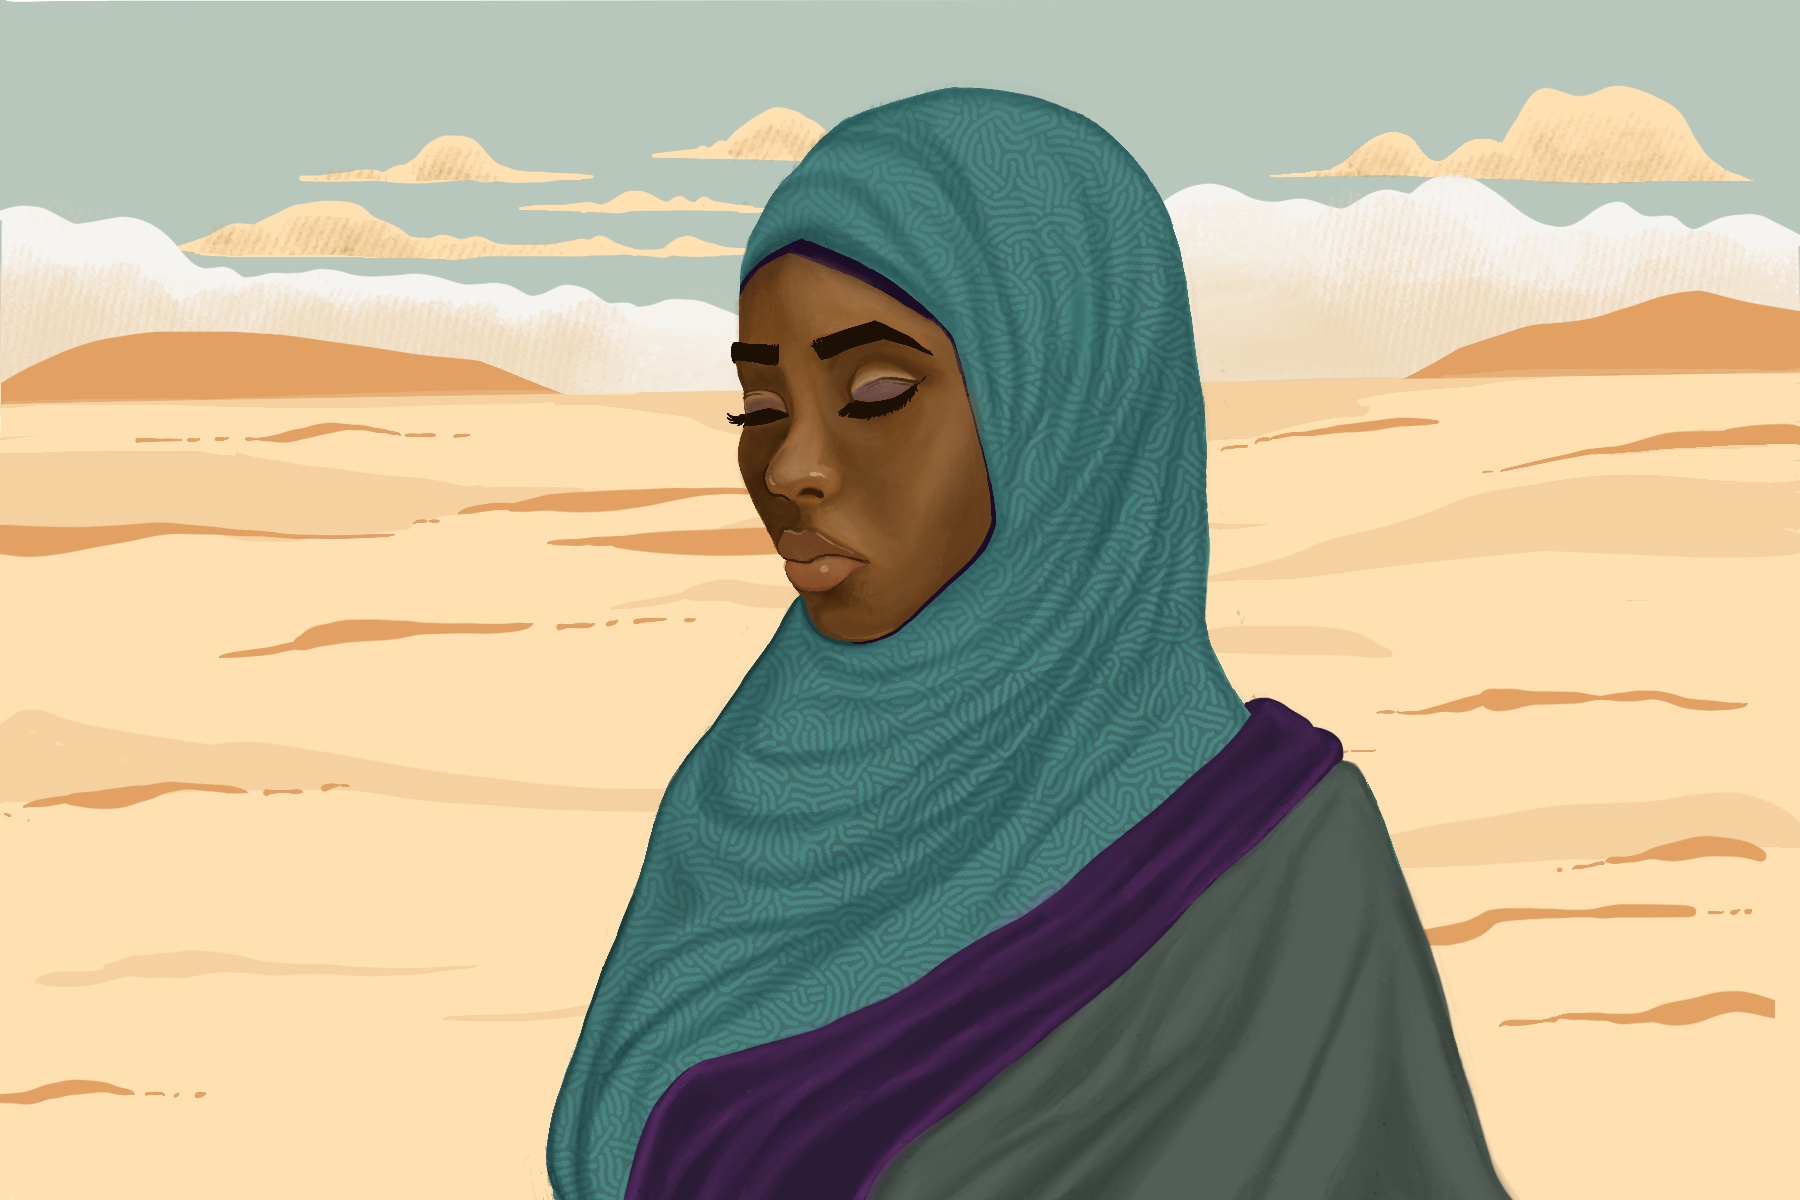 A solemn looking woman wearing a hijab in a surreal environment that appears to be the desert.